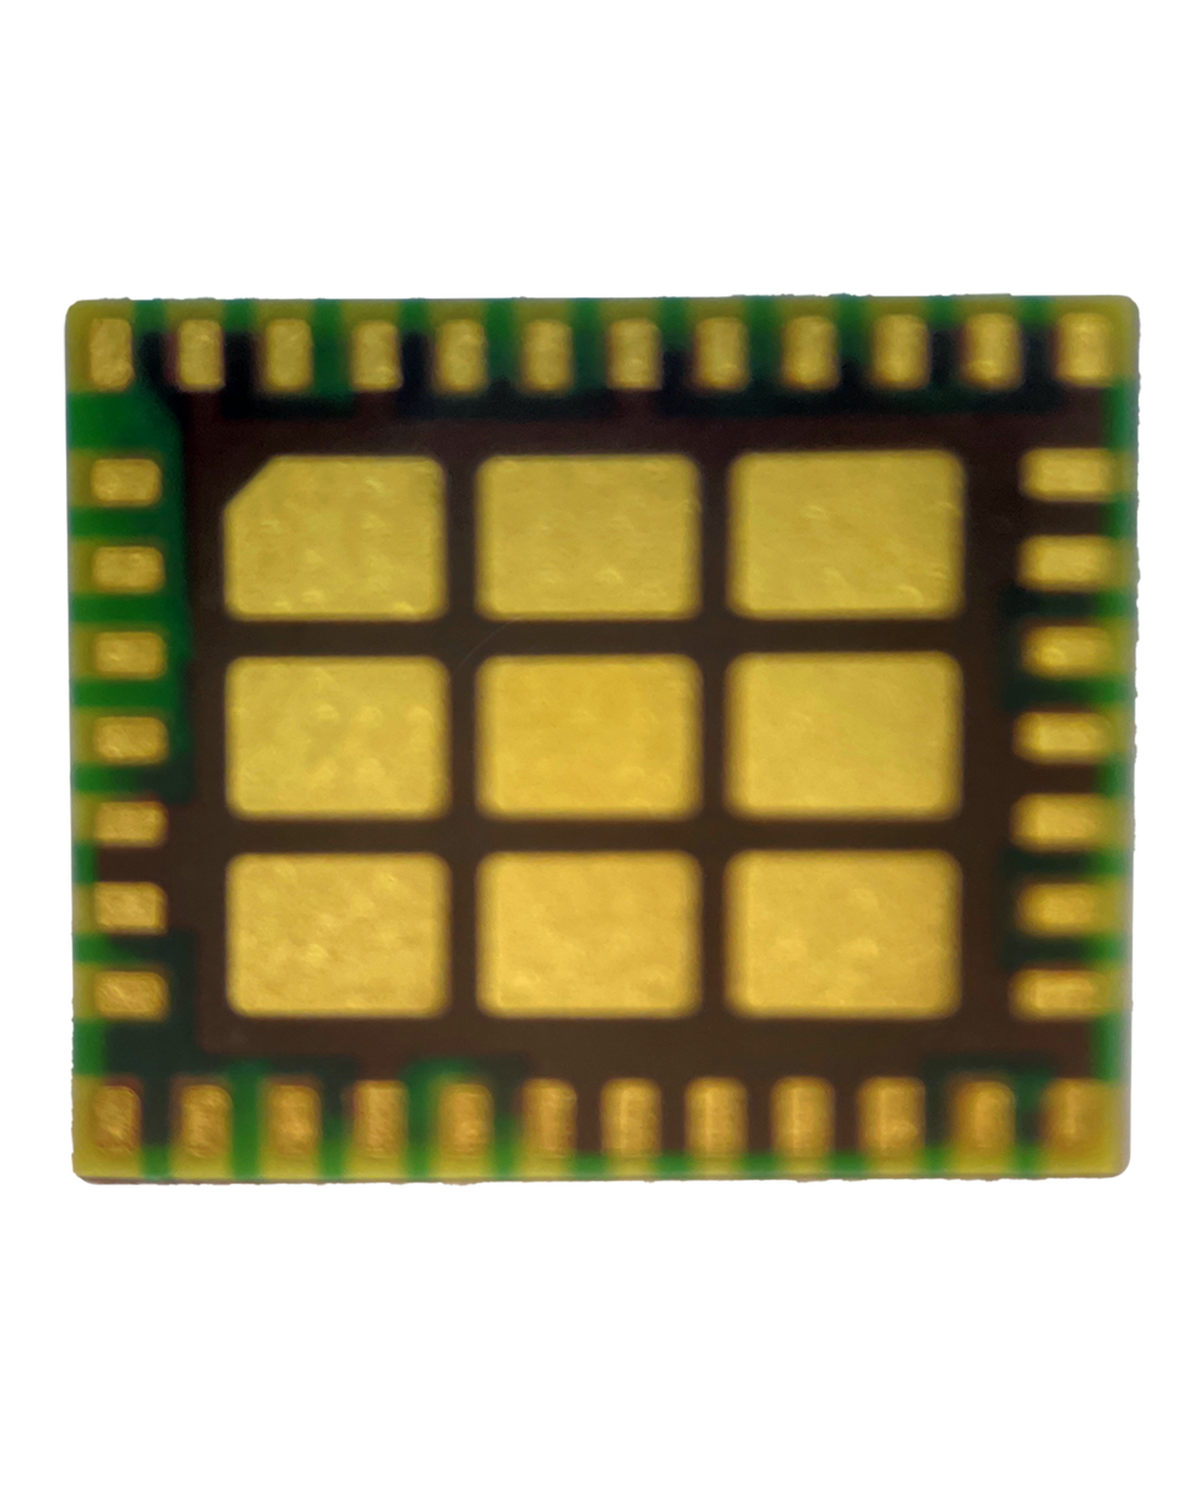 DIVERSITY MODULE IC COMPATIBLE WITH IPHONE 6S / 6S PLUS (UDIVA_RF: HFQSWAHUA-240: 47 PINS)